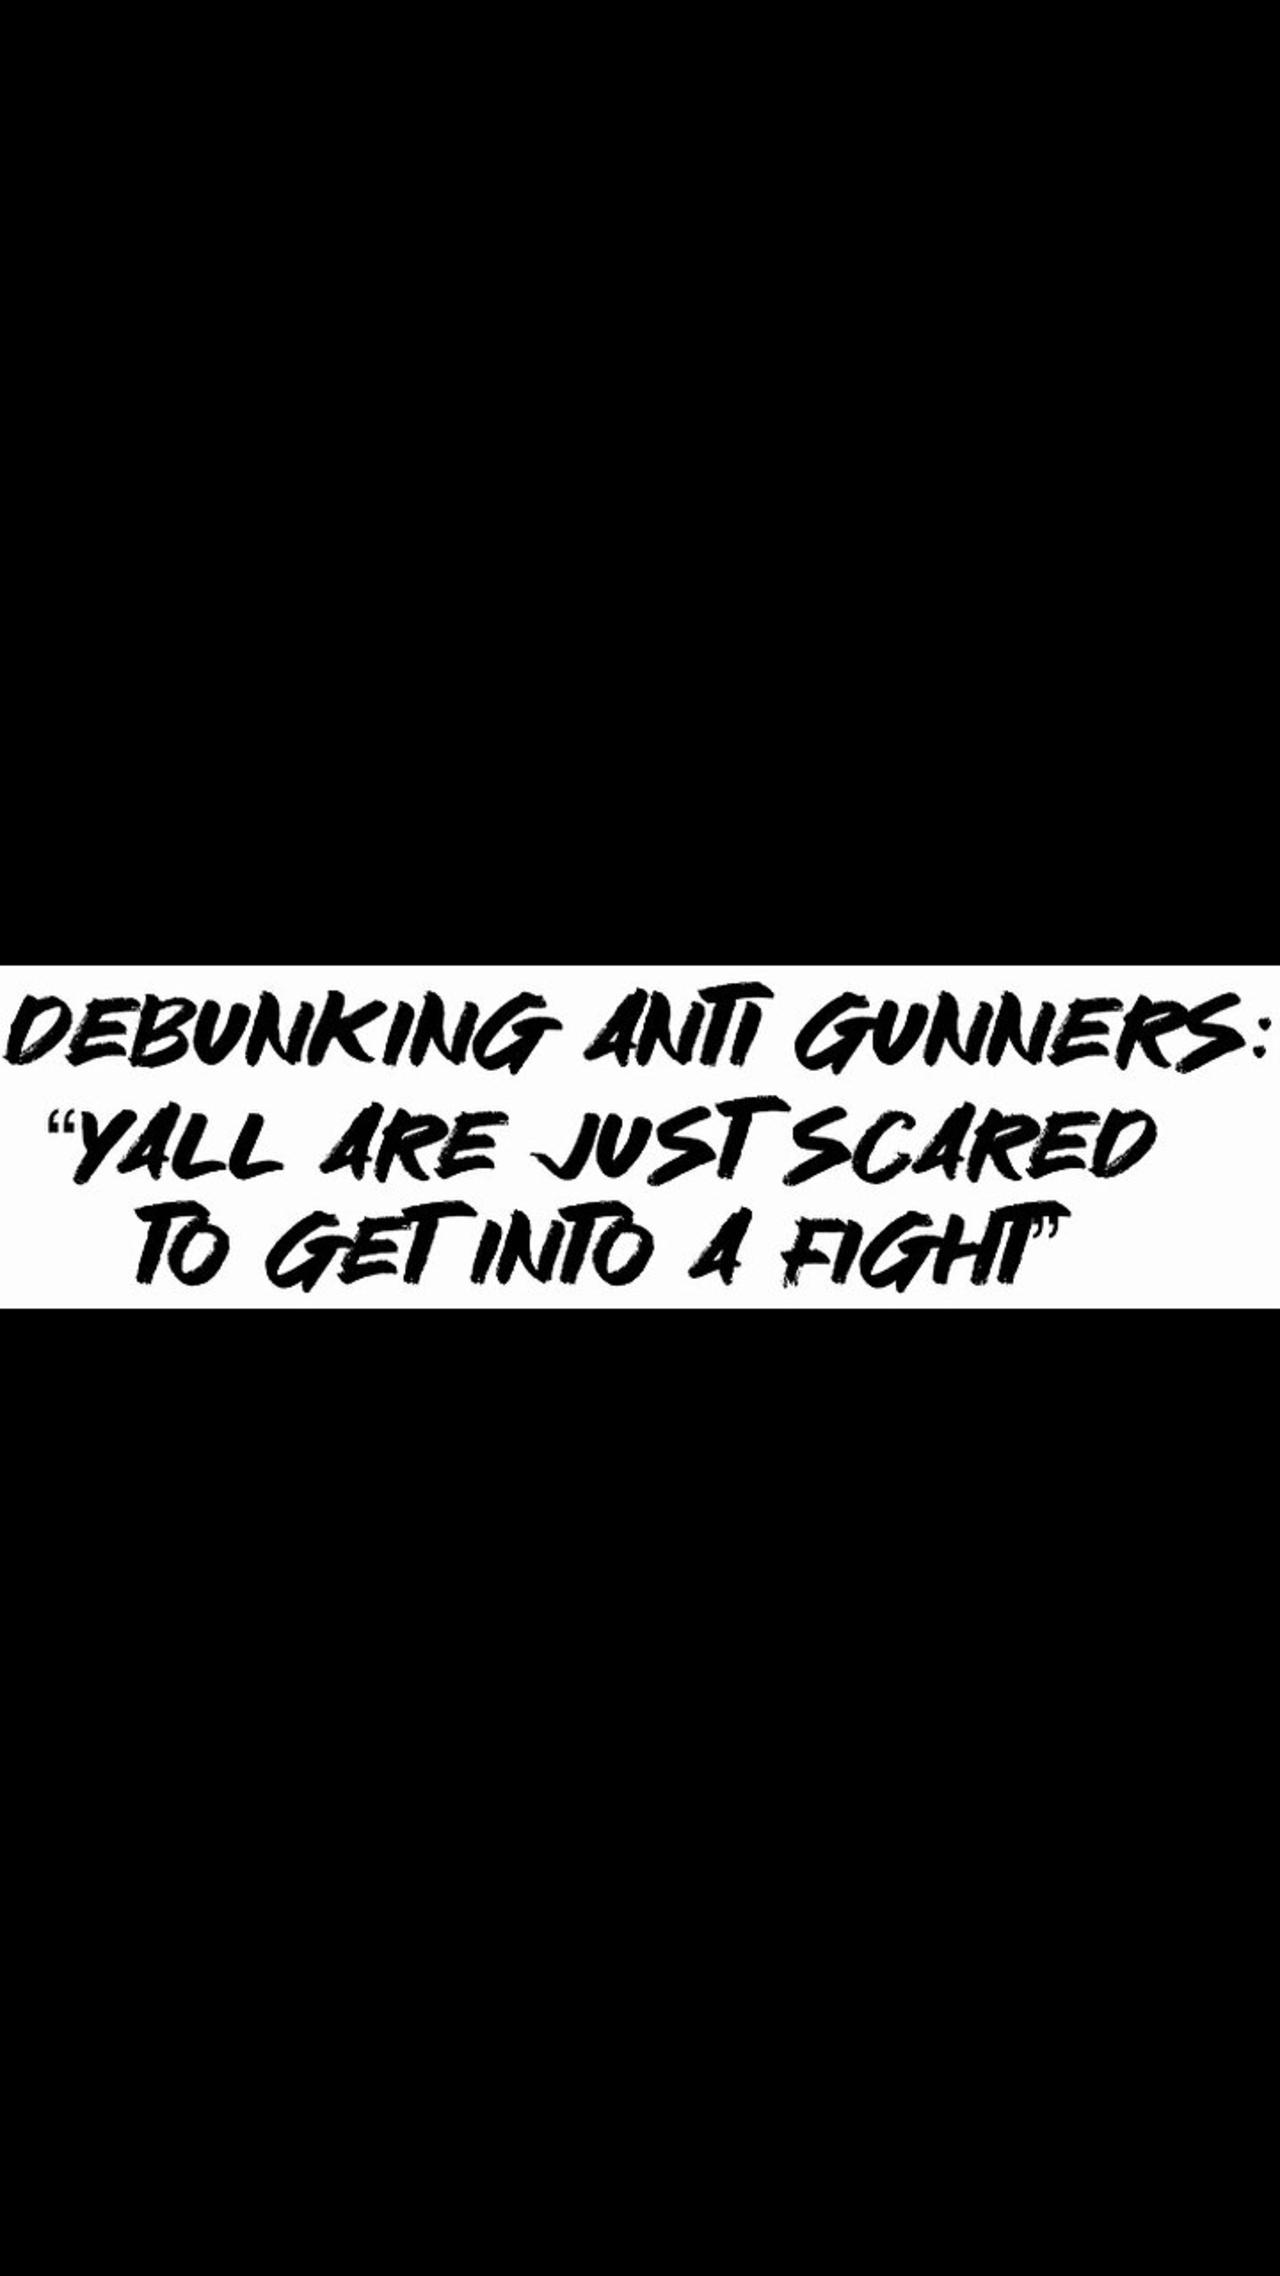 Debunking Anti Gunners: “Yall are just scared to get into a fight”